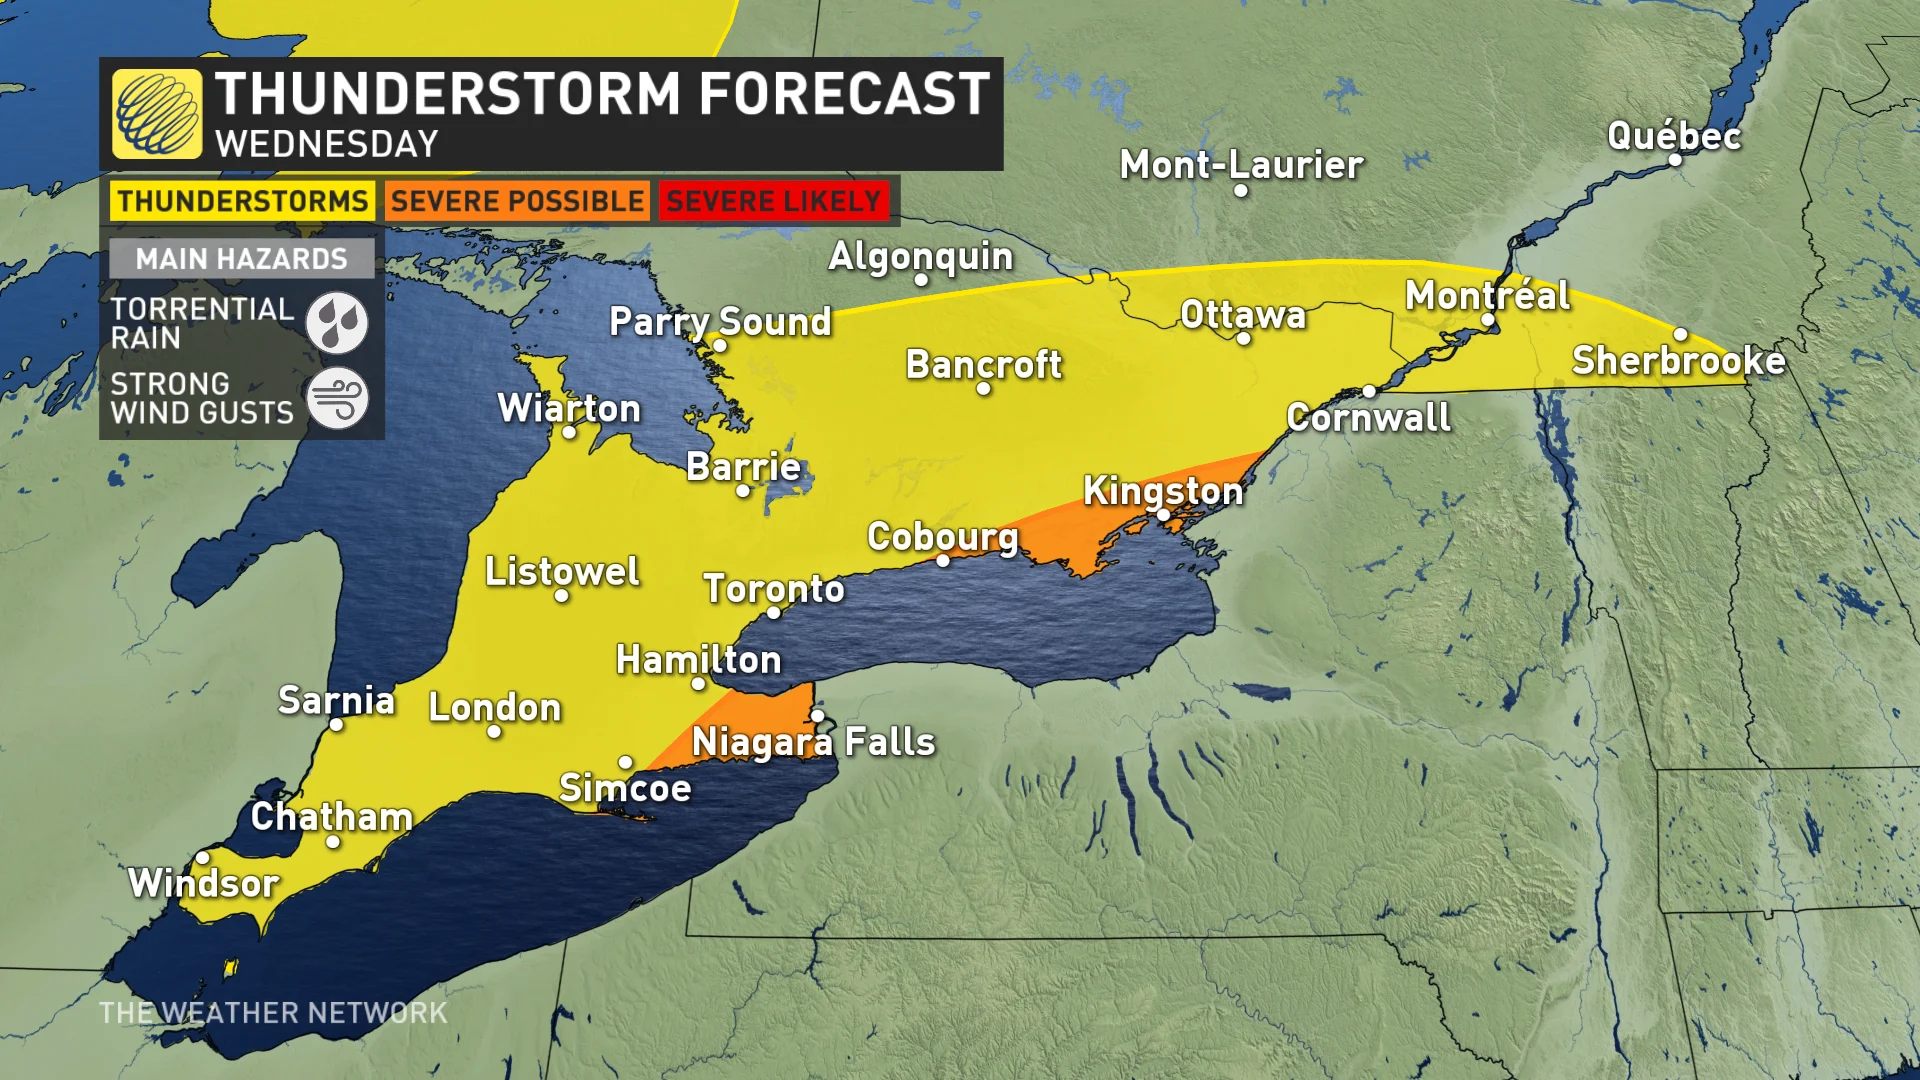 Baron - Tuesday thunderstorm risk - July 9 (PM update)